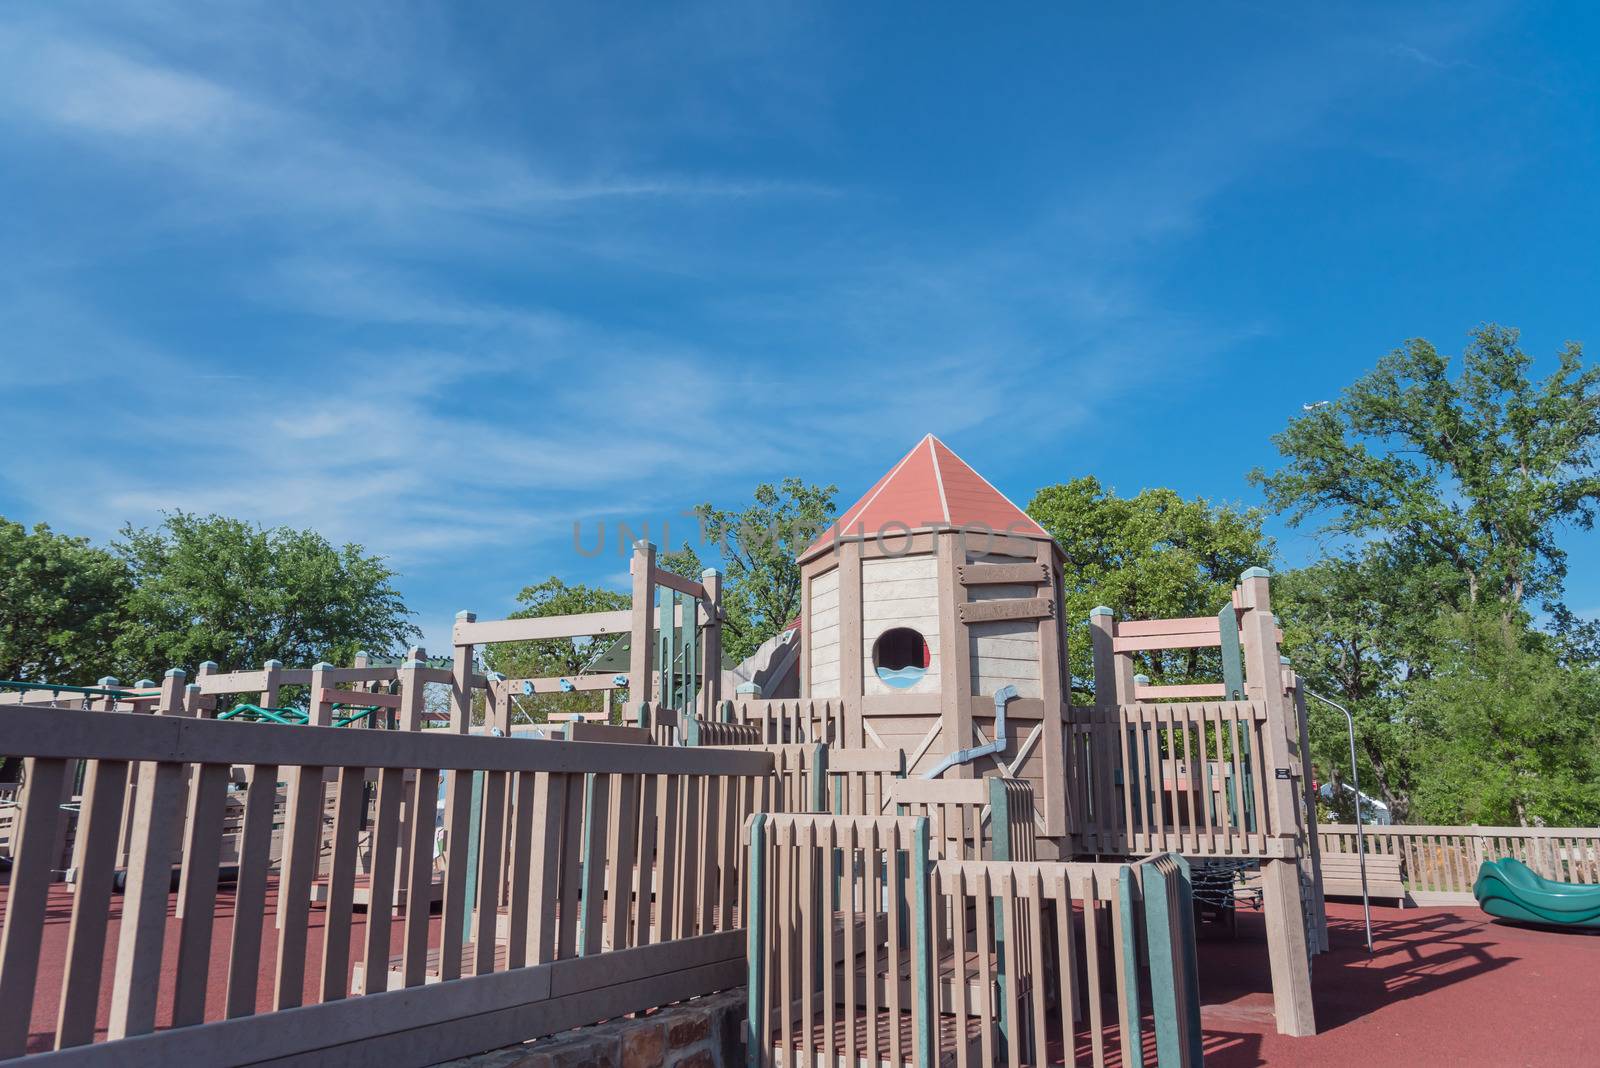 Castle-inspired structure, elaborate wooden playground near Dallas, Texas, USA